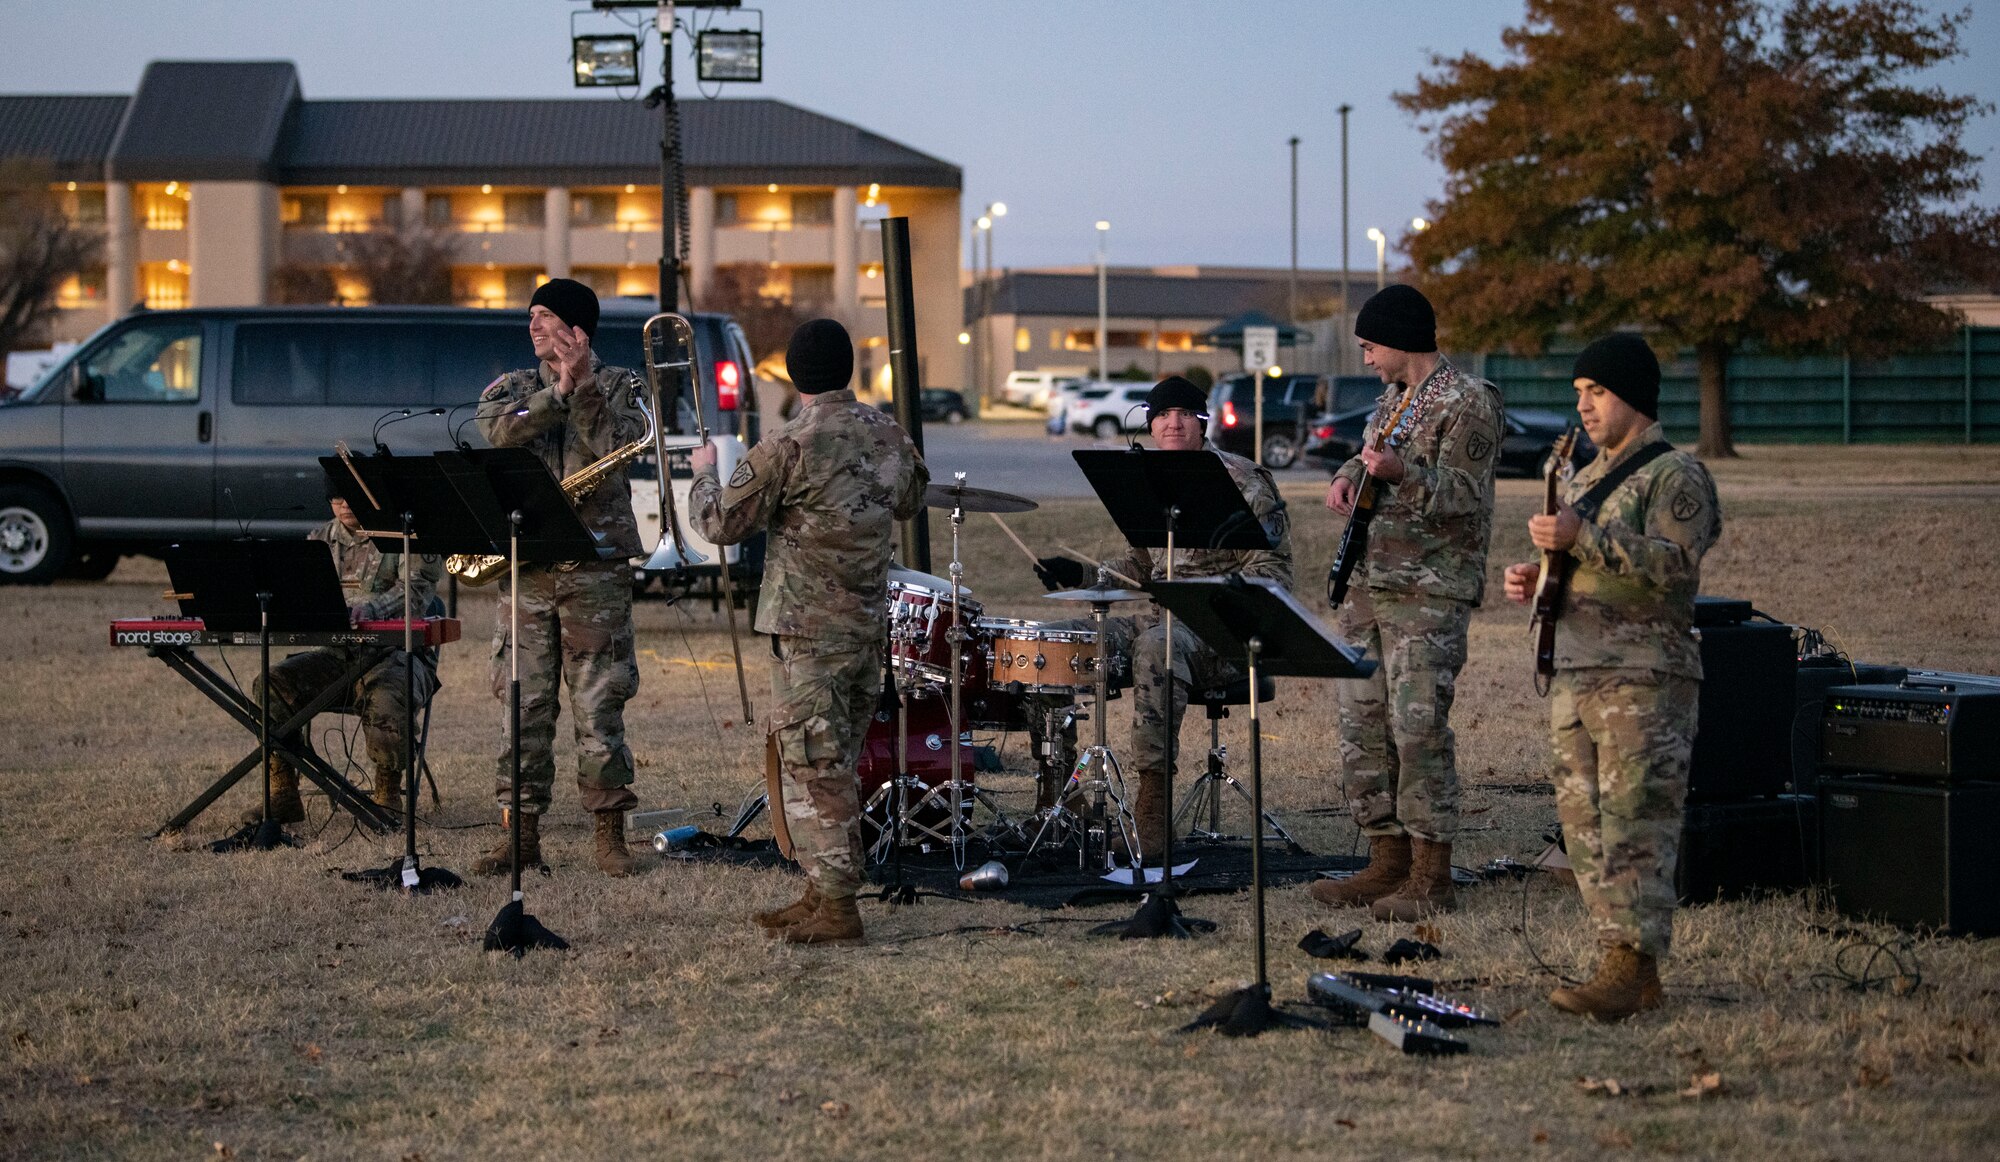 Soldiers from the Fort Sill Army Band perform a series of songs during the annual holiday tree lighting event, Dec. 3, 2020, at Altus Air Force Base, Oklahoma. The yearly tradition provided attendees the opportunity to get together to celebrate the holiday season while practicing COVID-19 mitigation measures. (U.S. Air Force photo by Airman 1st Class Amanda Lovelace)